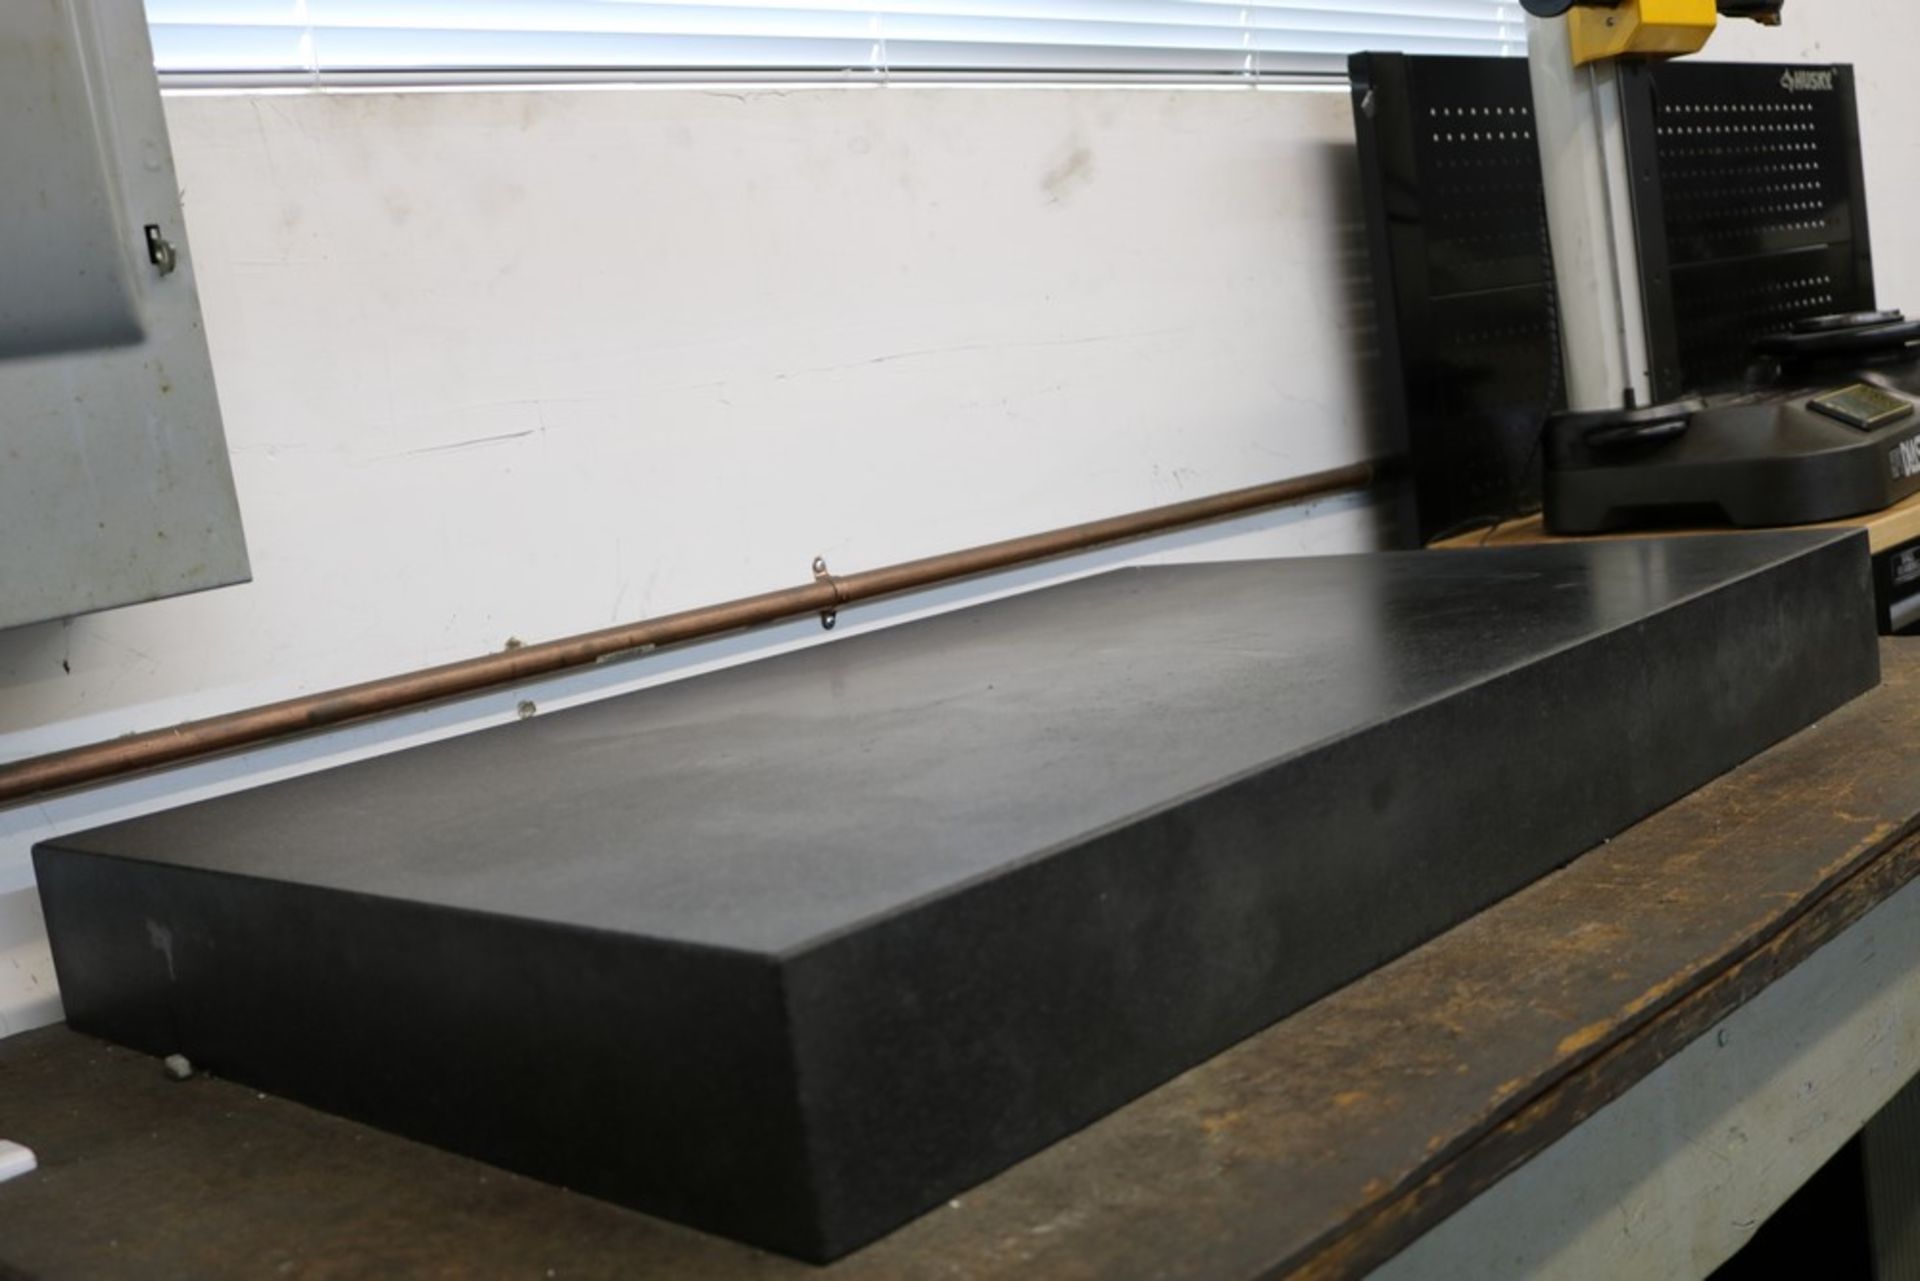 Black Granite Surface Plate and Wood Shop Table 24" x 36" x 4" - Image 5 of 5